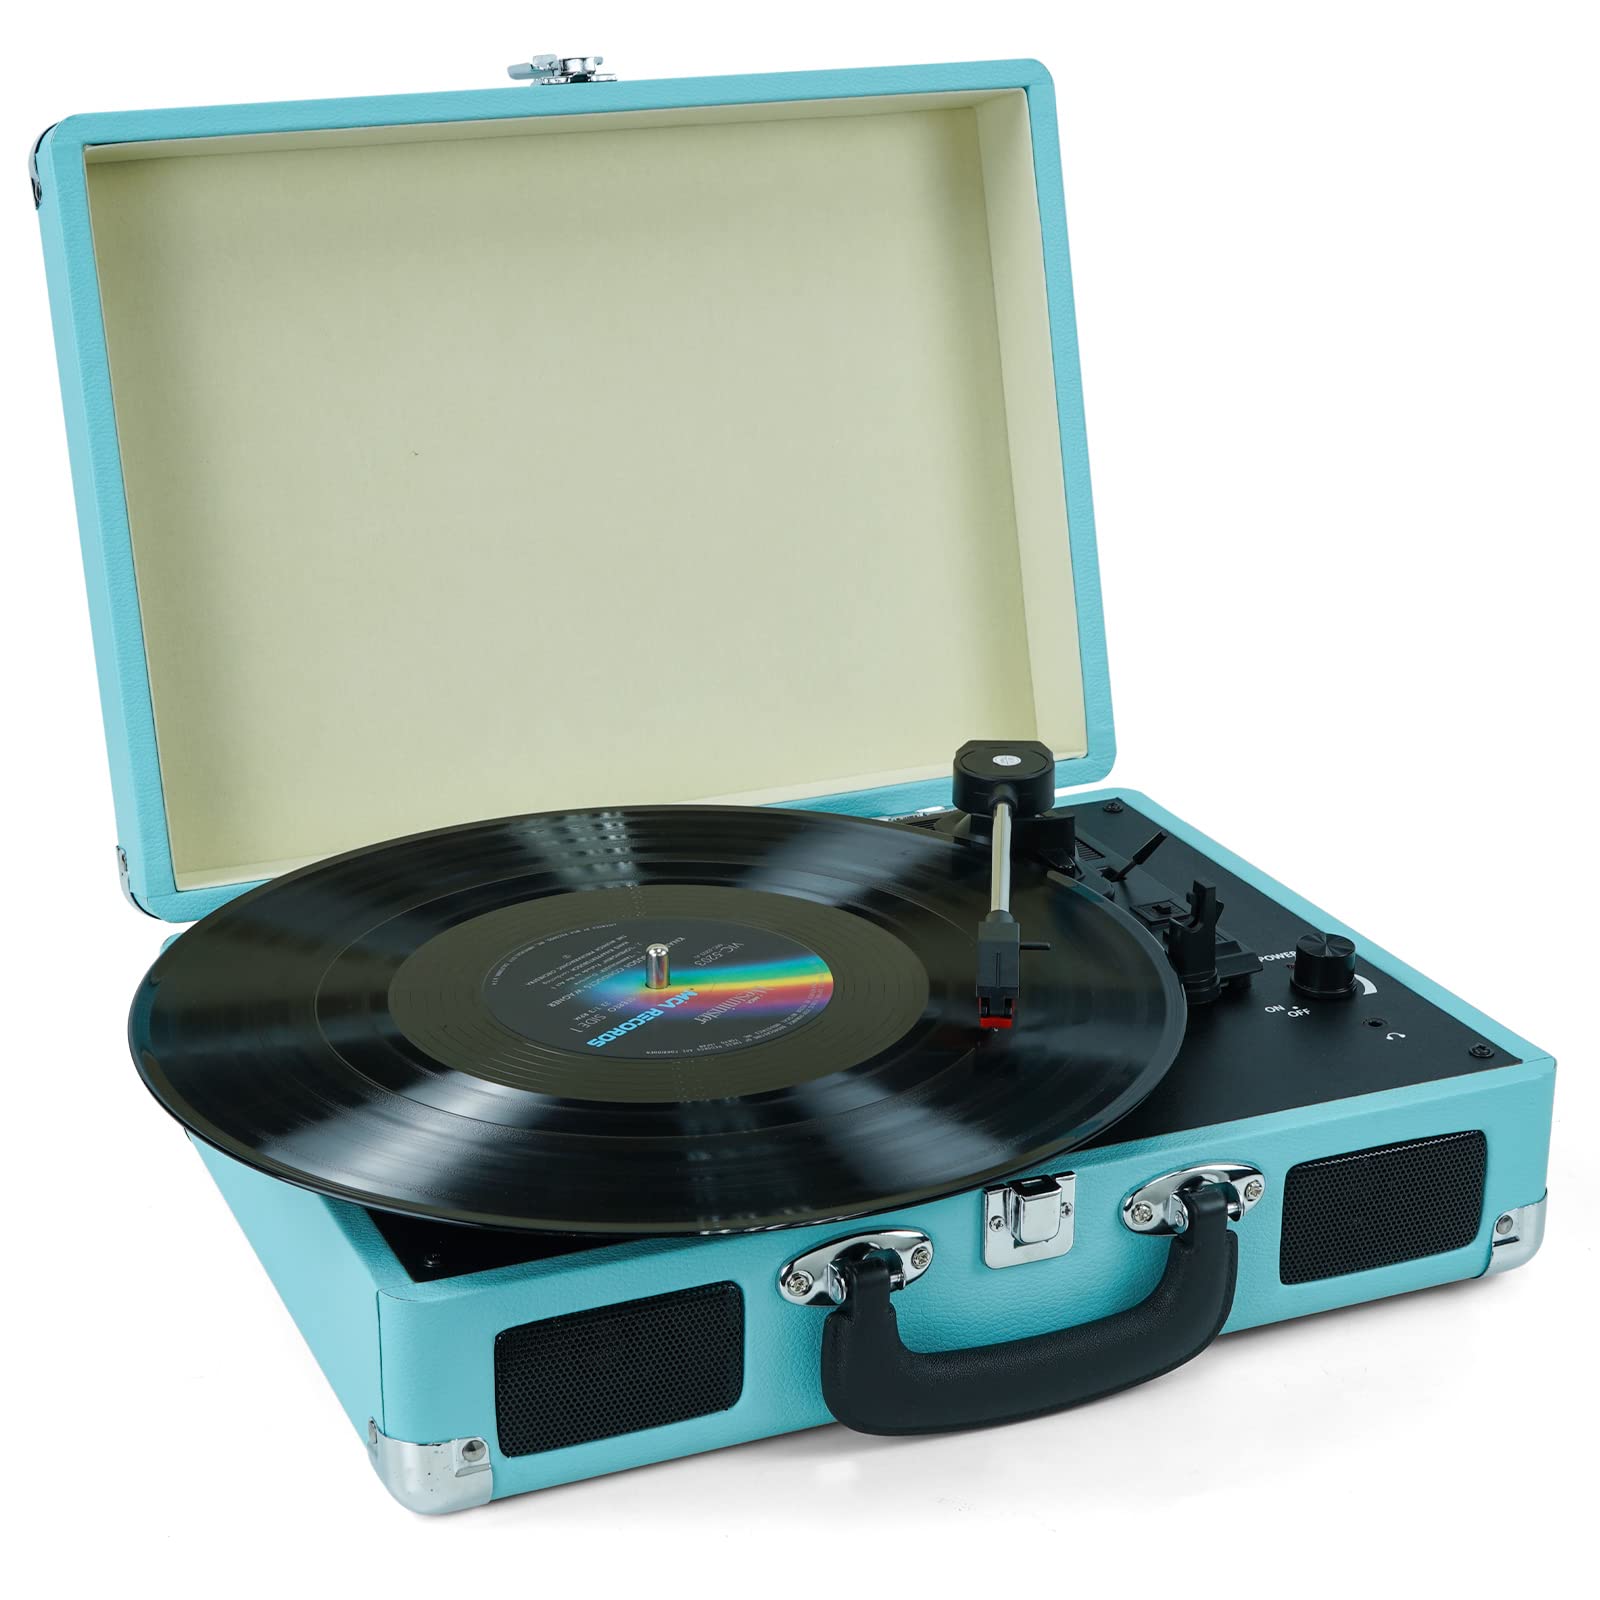 Vinyl Record Player, 3 Speeds Suitcase Portable Record Player with Built-in Speakers, Vintage Belt Driven Turntable with RCA Output/Headphone/Aux in Jack/45 Adapter Blue